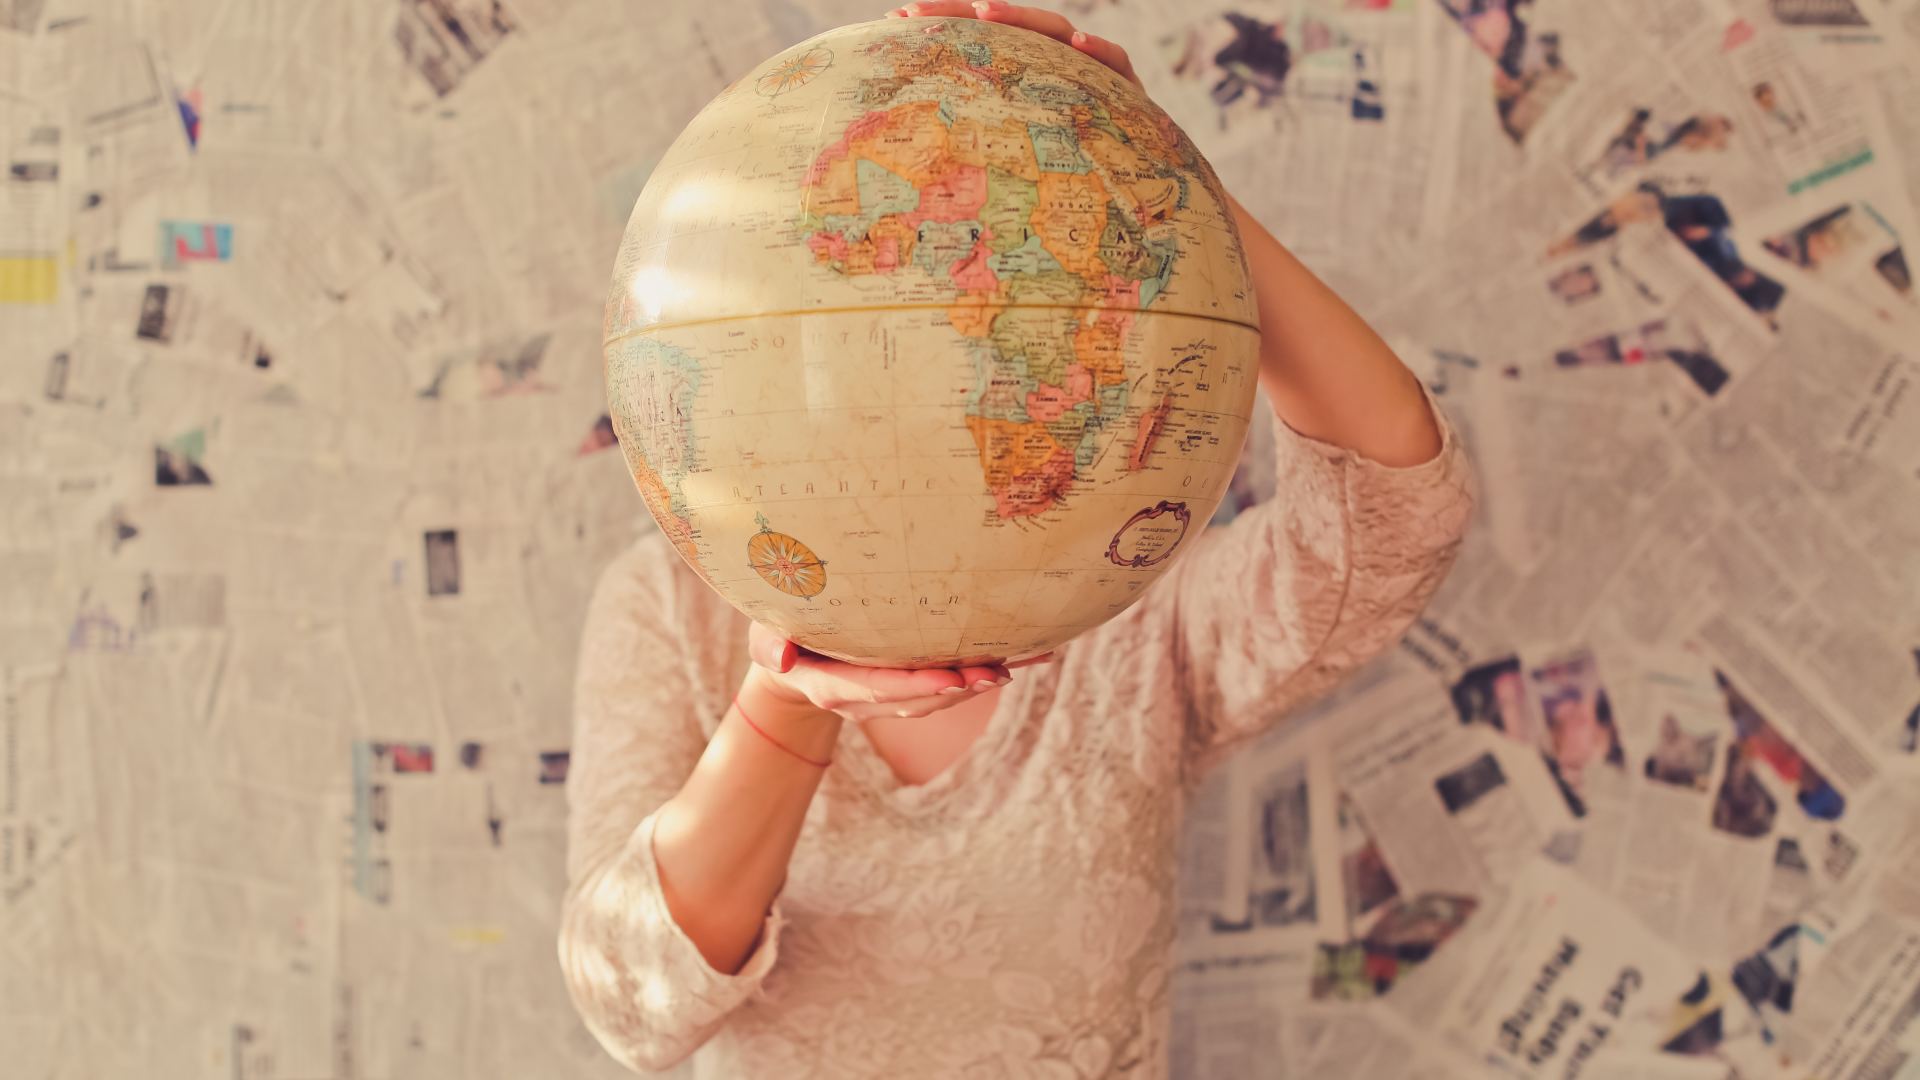 Globes Continents Map Countries Women Depth Of Field Newspapers Hands Africa Wall Frontal View 1920x1080